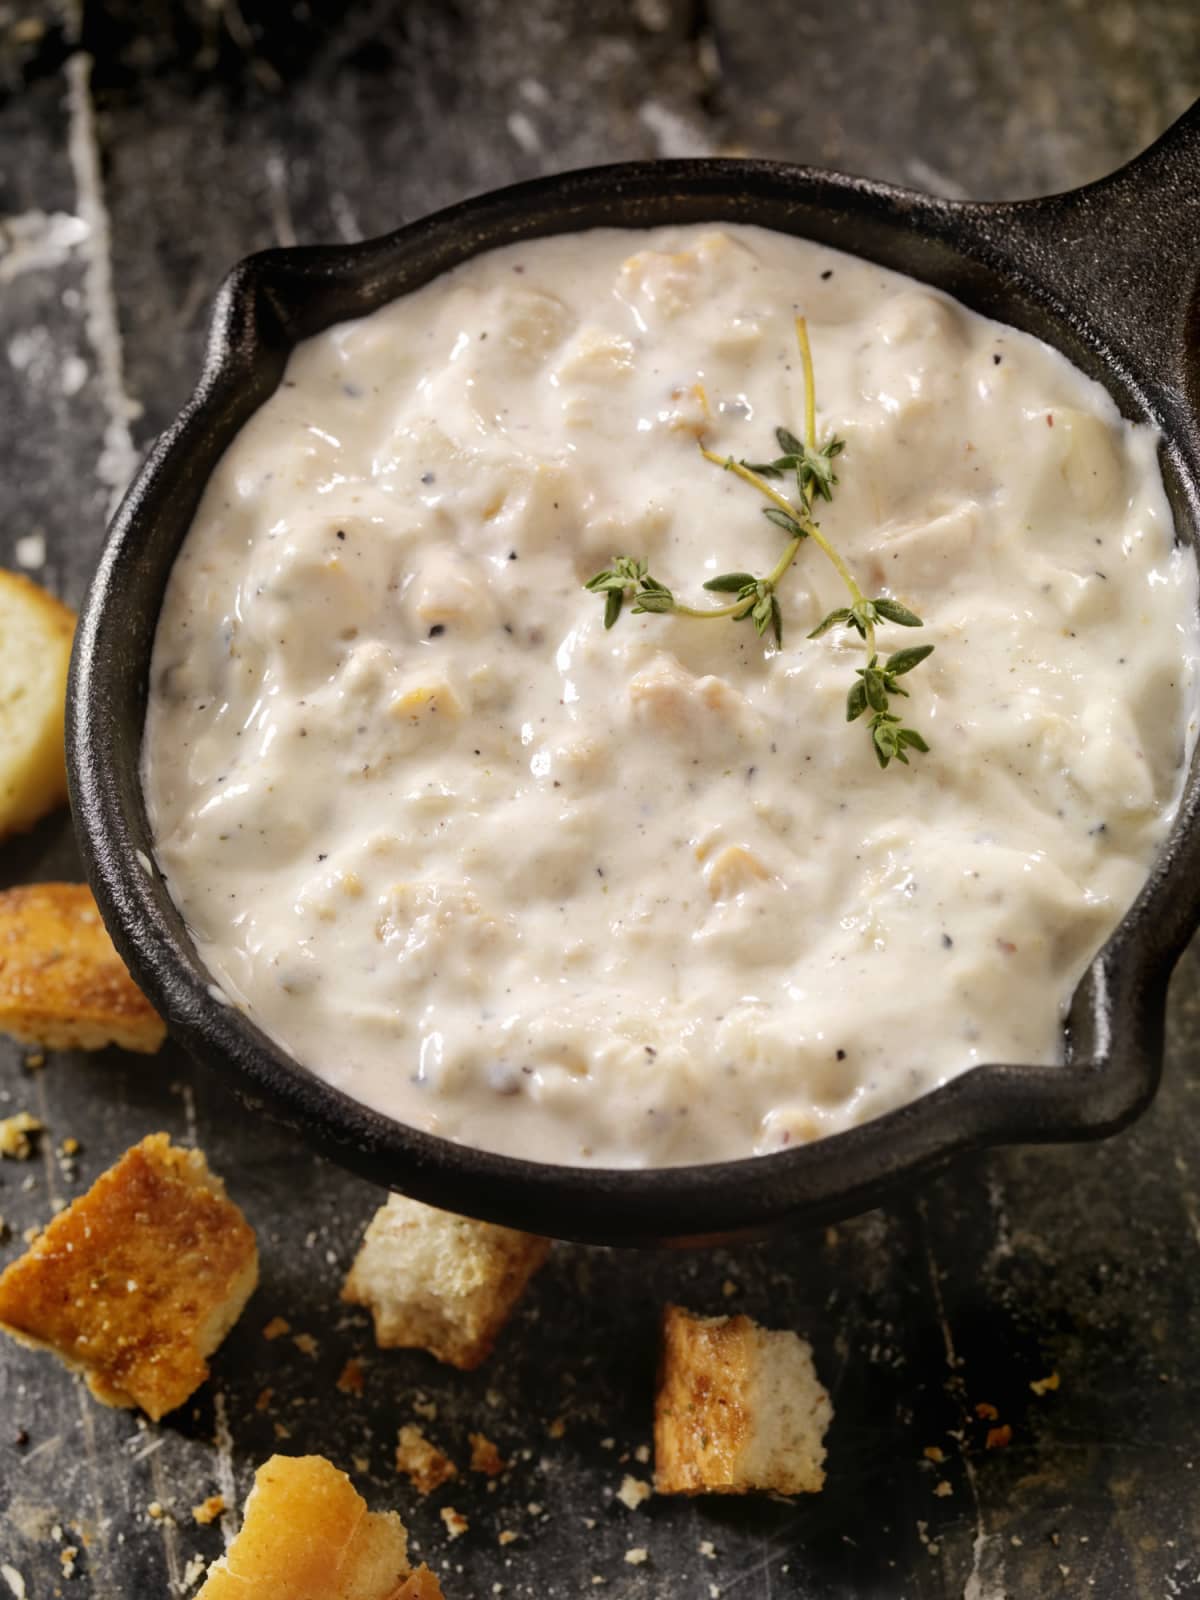 New England style clam chowder with toasted croutons and fresh thyme